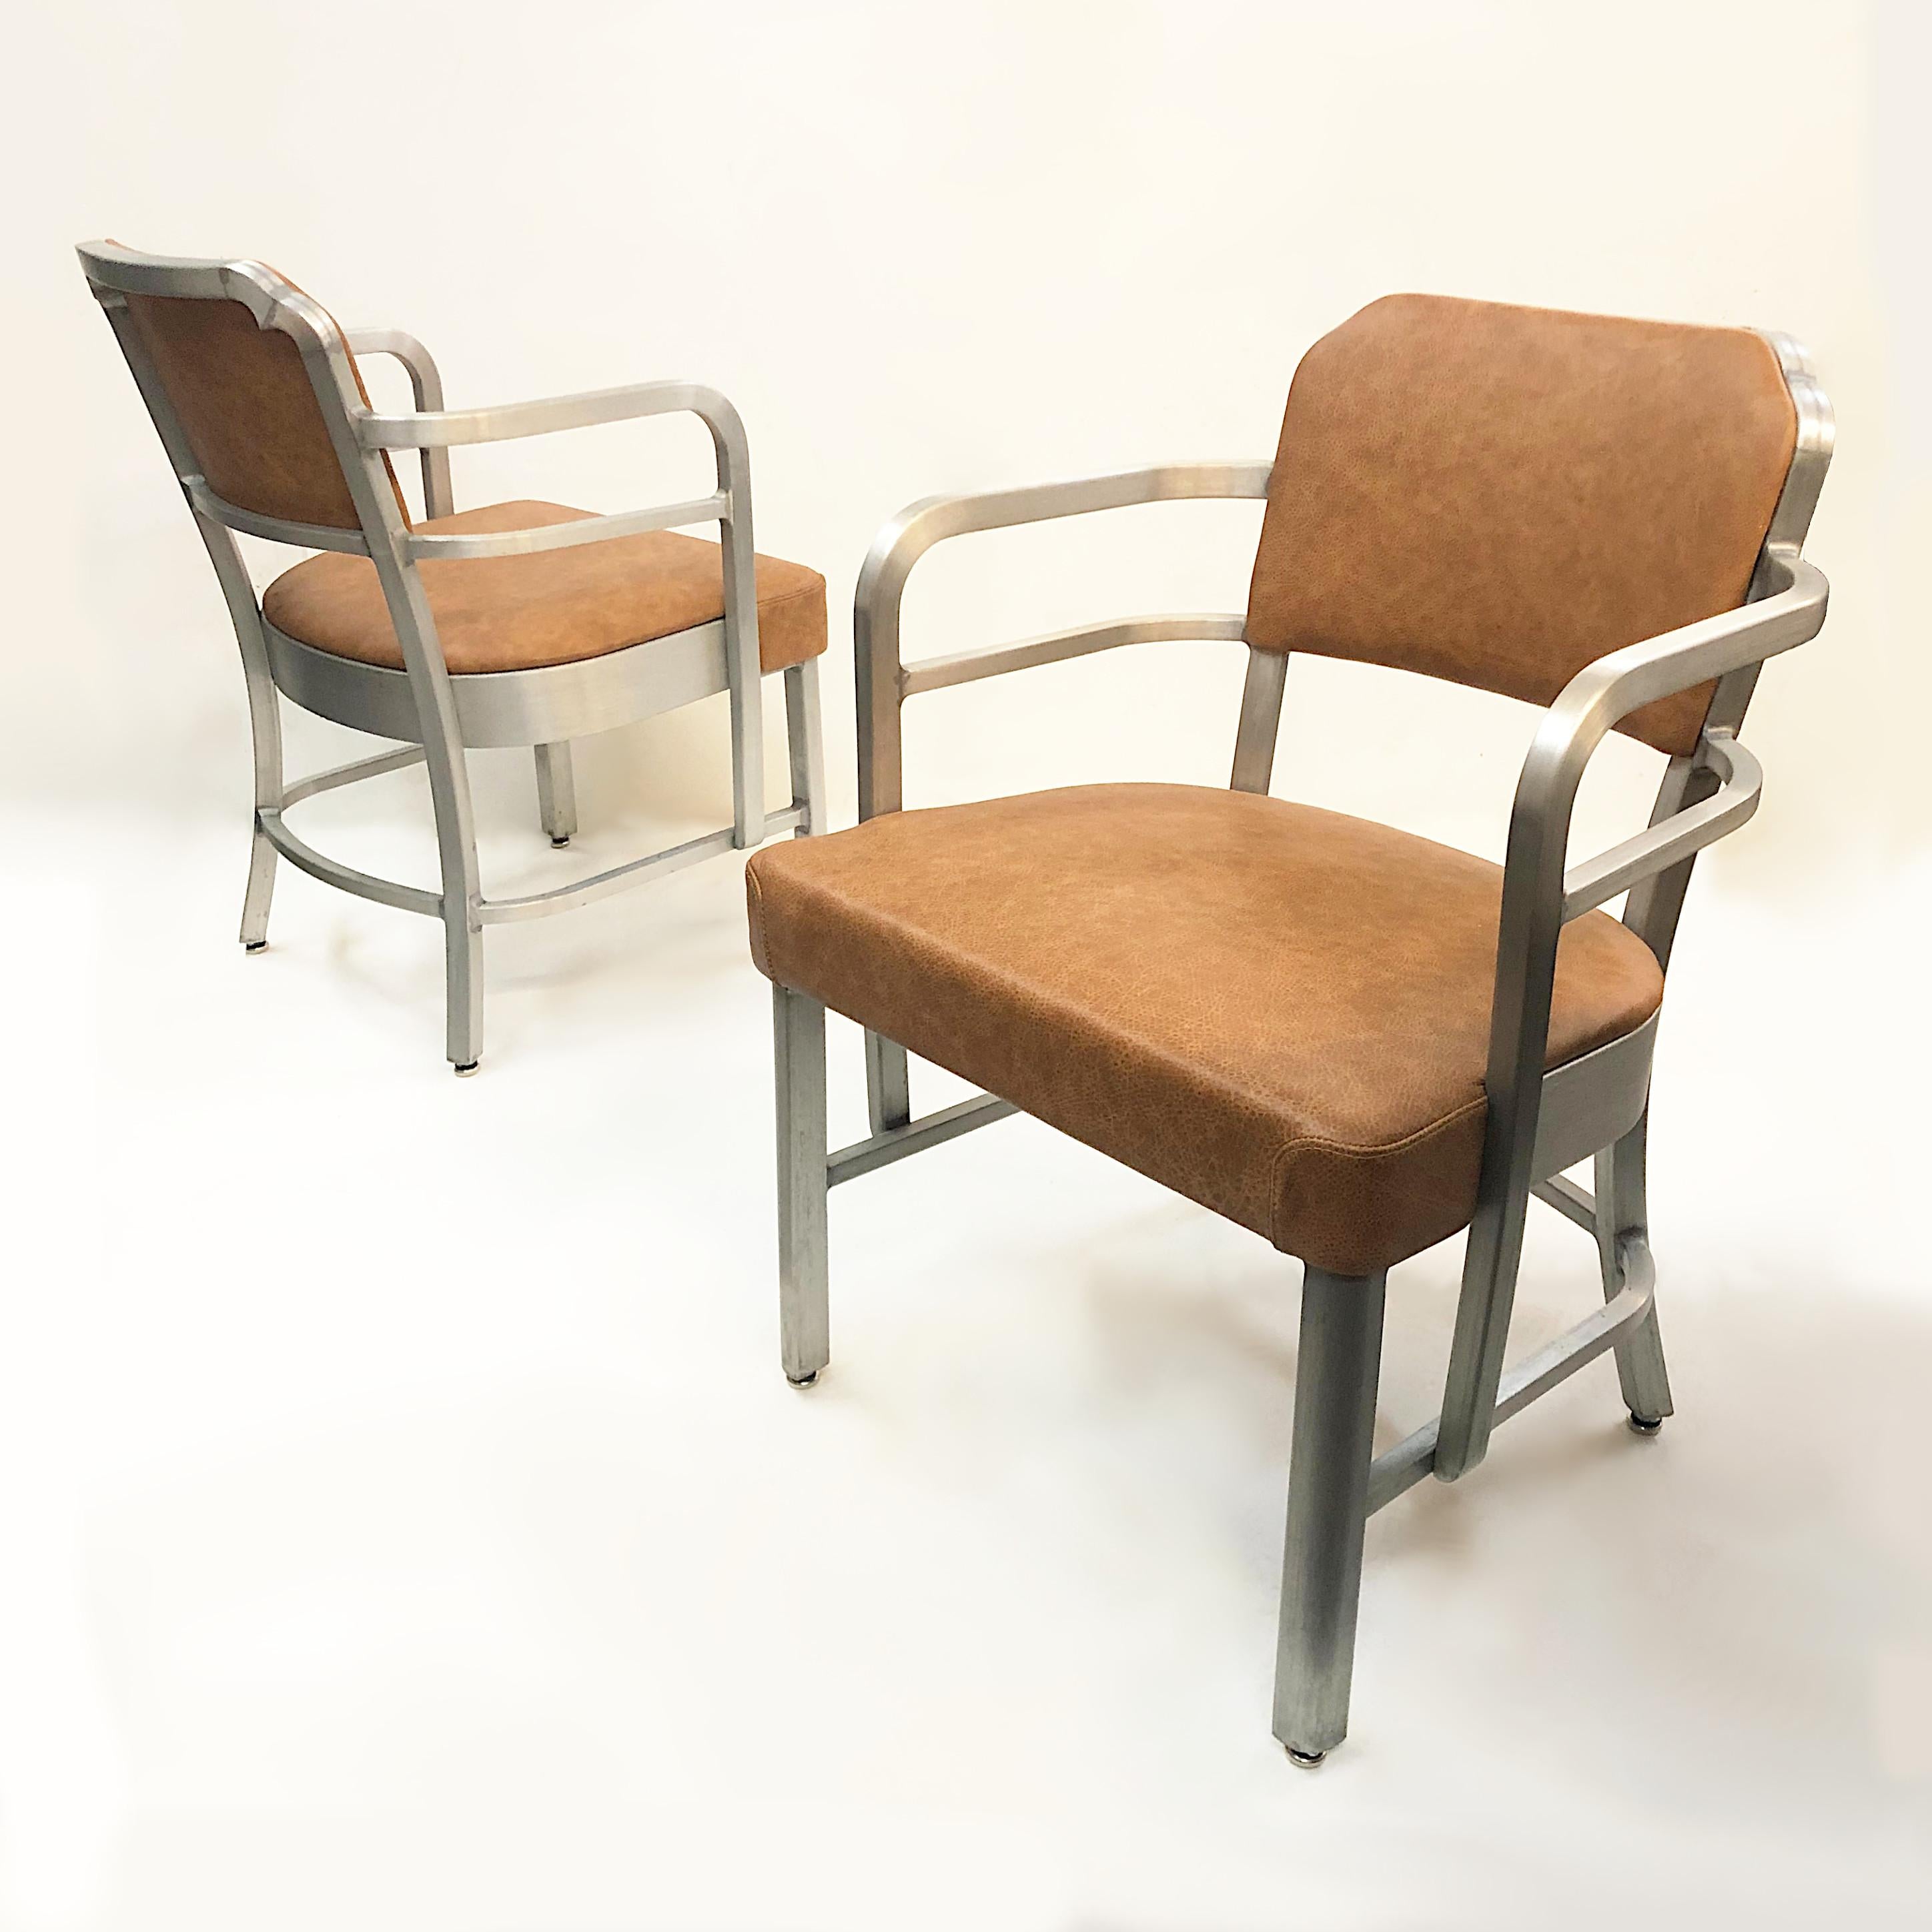 This is a wonderful pair of rare side chairs by the GoodForm/General Fireproofing Company. Chairs feature brushed aluminum frames, new distressed brown leather and fantastic Art-Deco lines. The aluminum and brown leather give these chairs a